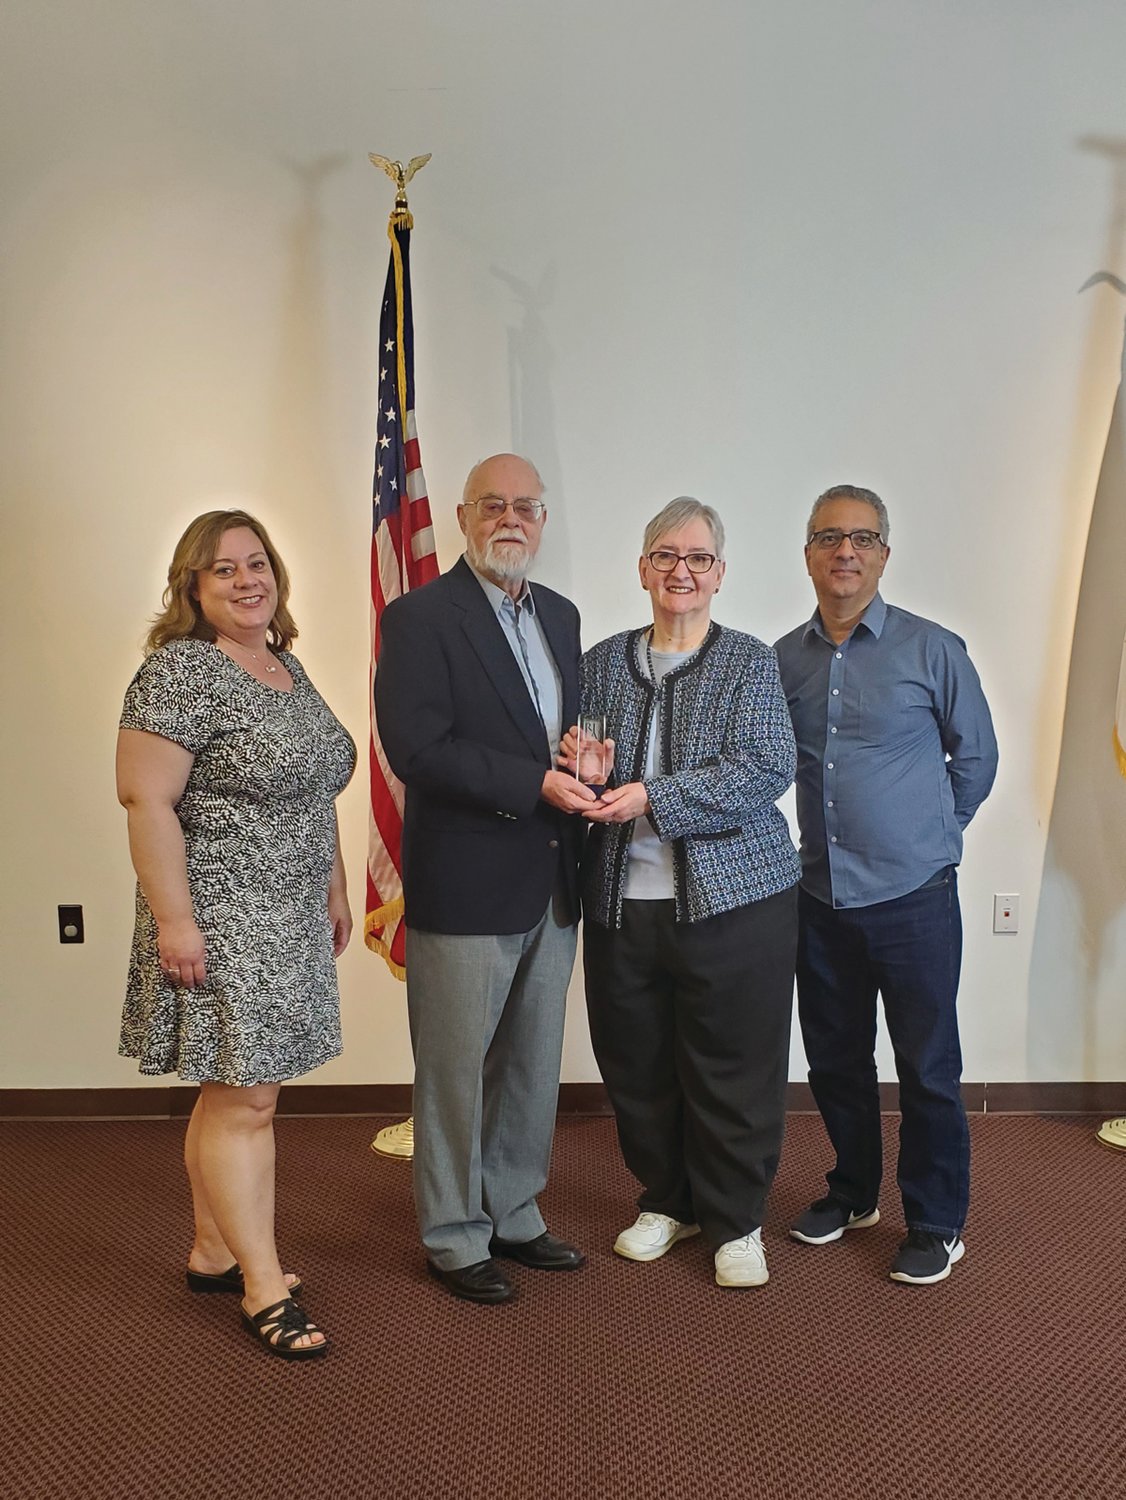 FRIENDS OF THE LIBRARY: Mary Ann and Walter Slocomb
received the Meritorious Friend of the Library Award for their contributions to the Cranston Public Library. They are joined by Julie Holden, outgoing president of the Rhode Island Library Association, and Ed Garcia, director of the Cranston library system.